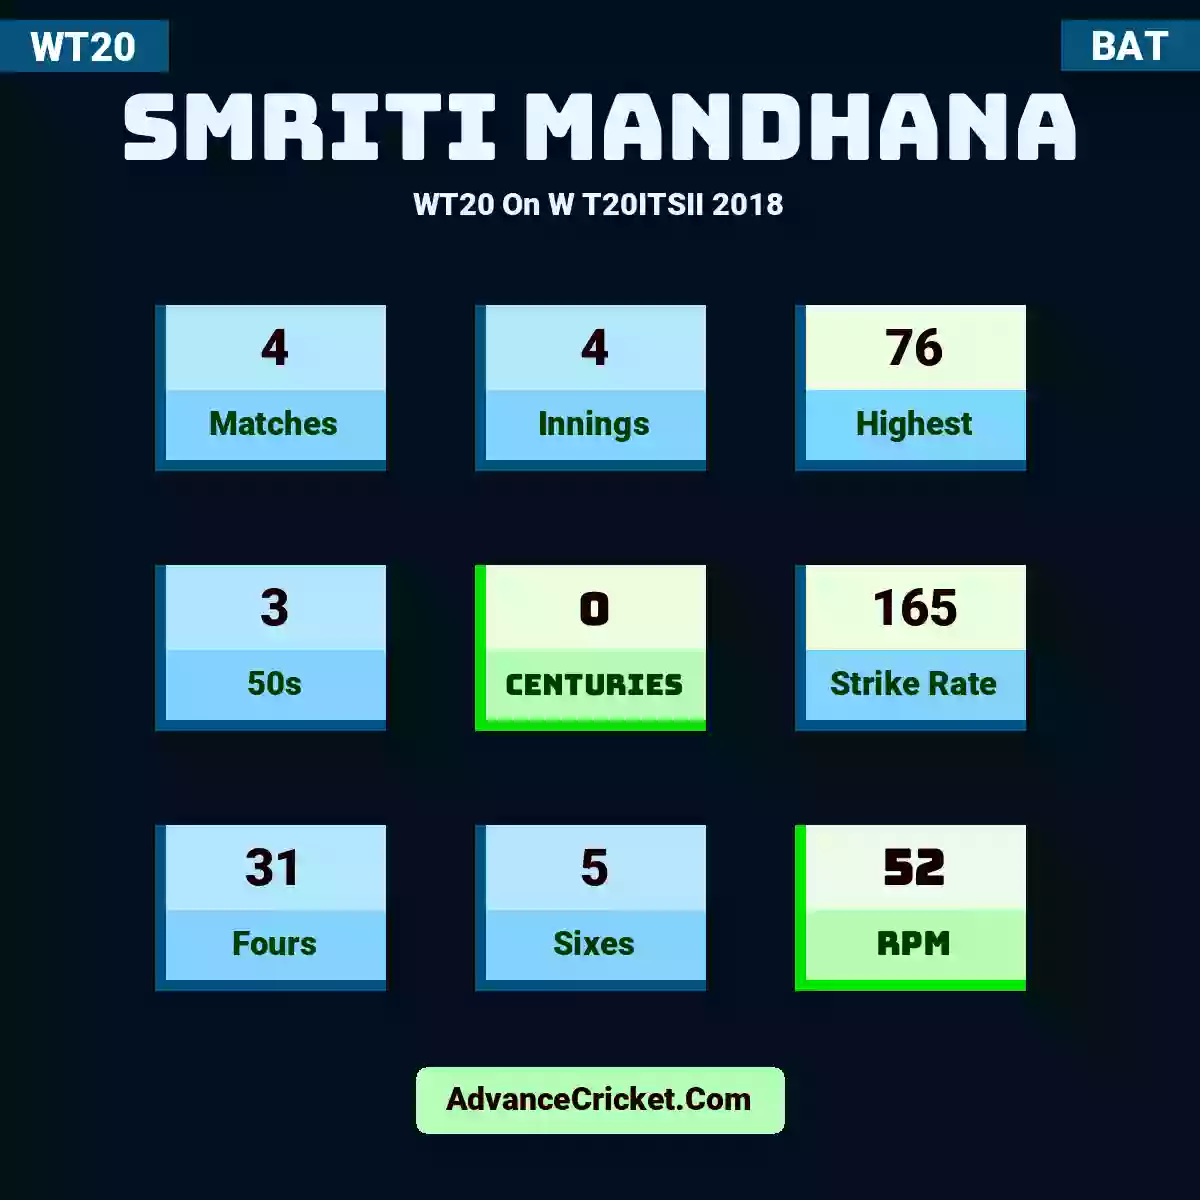 Smriti Mandhana WT20  On W T20ITSII 2018, Smriti Mandhana played 4 matches, scored 76 runs as highest, 3 half-centuries, and 0 centuries, with a strike rate of 165. S.Mandhana hit 31 fours and 5 sixes, with an RPM of 52.